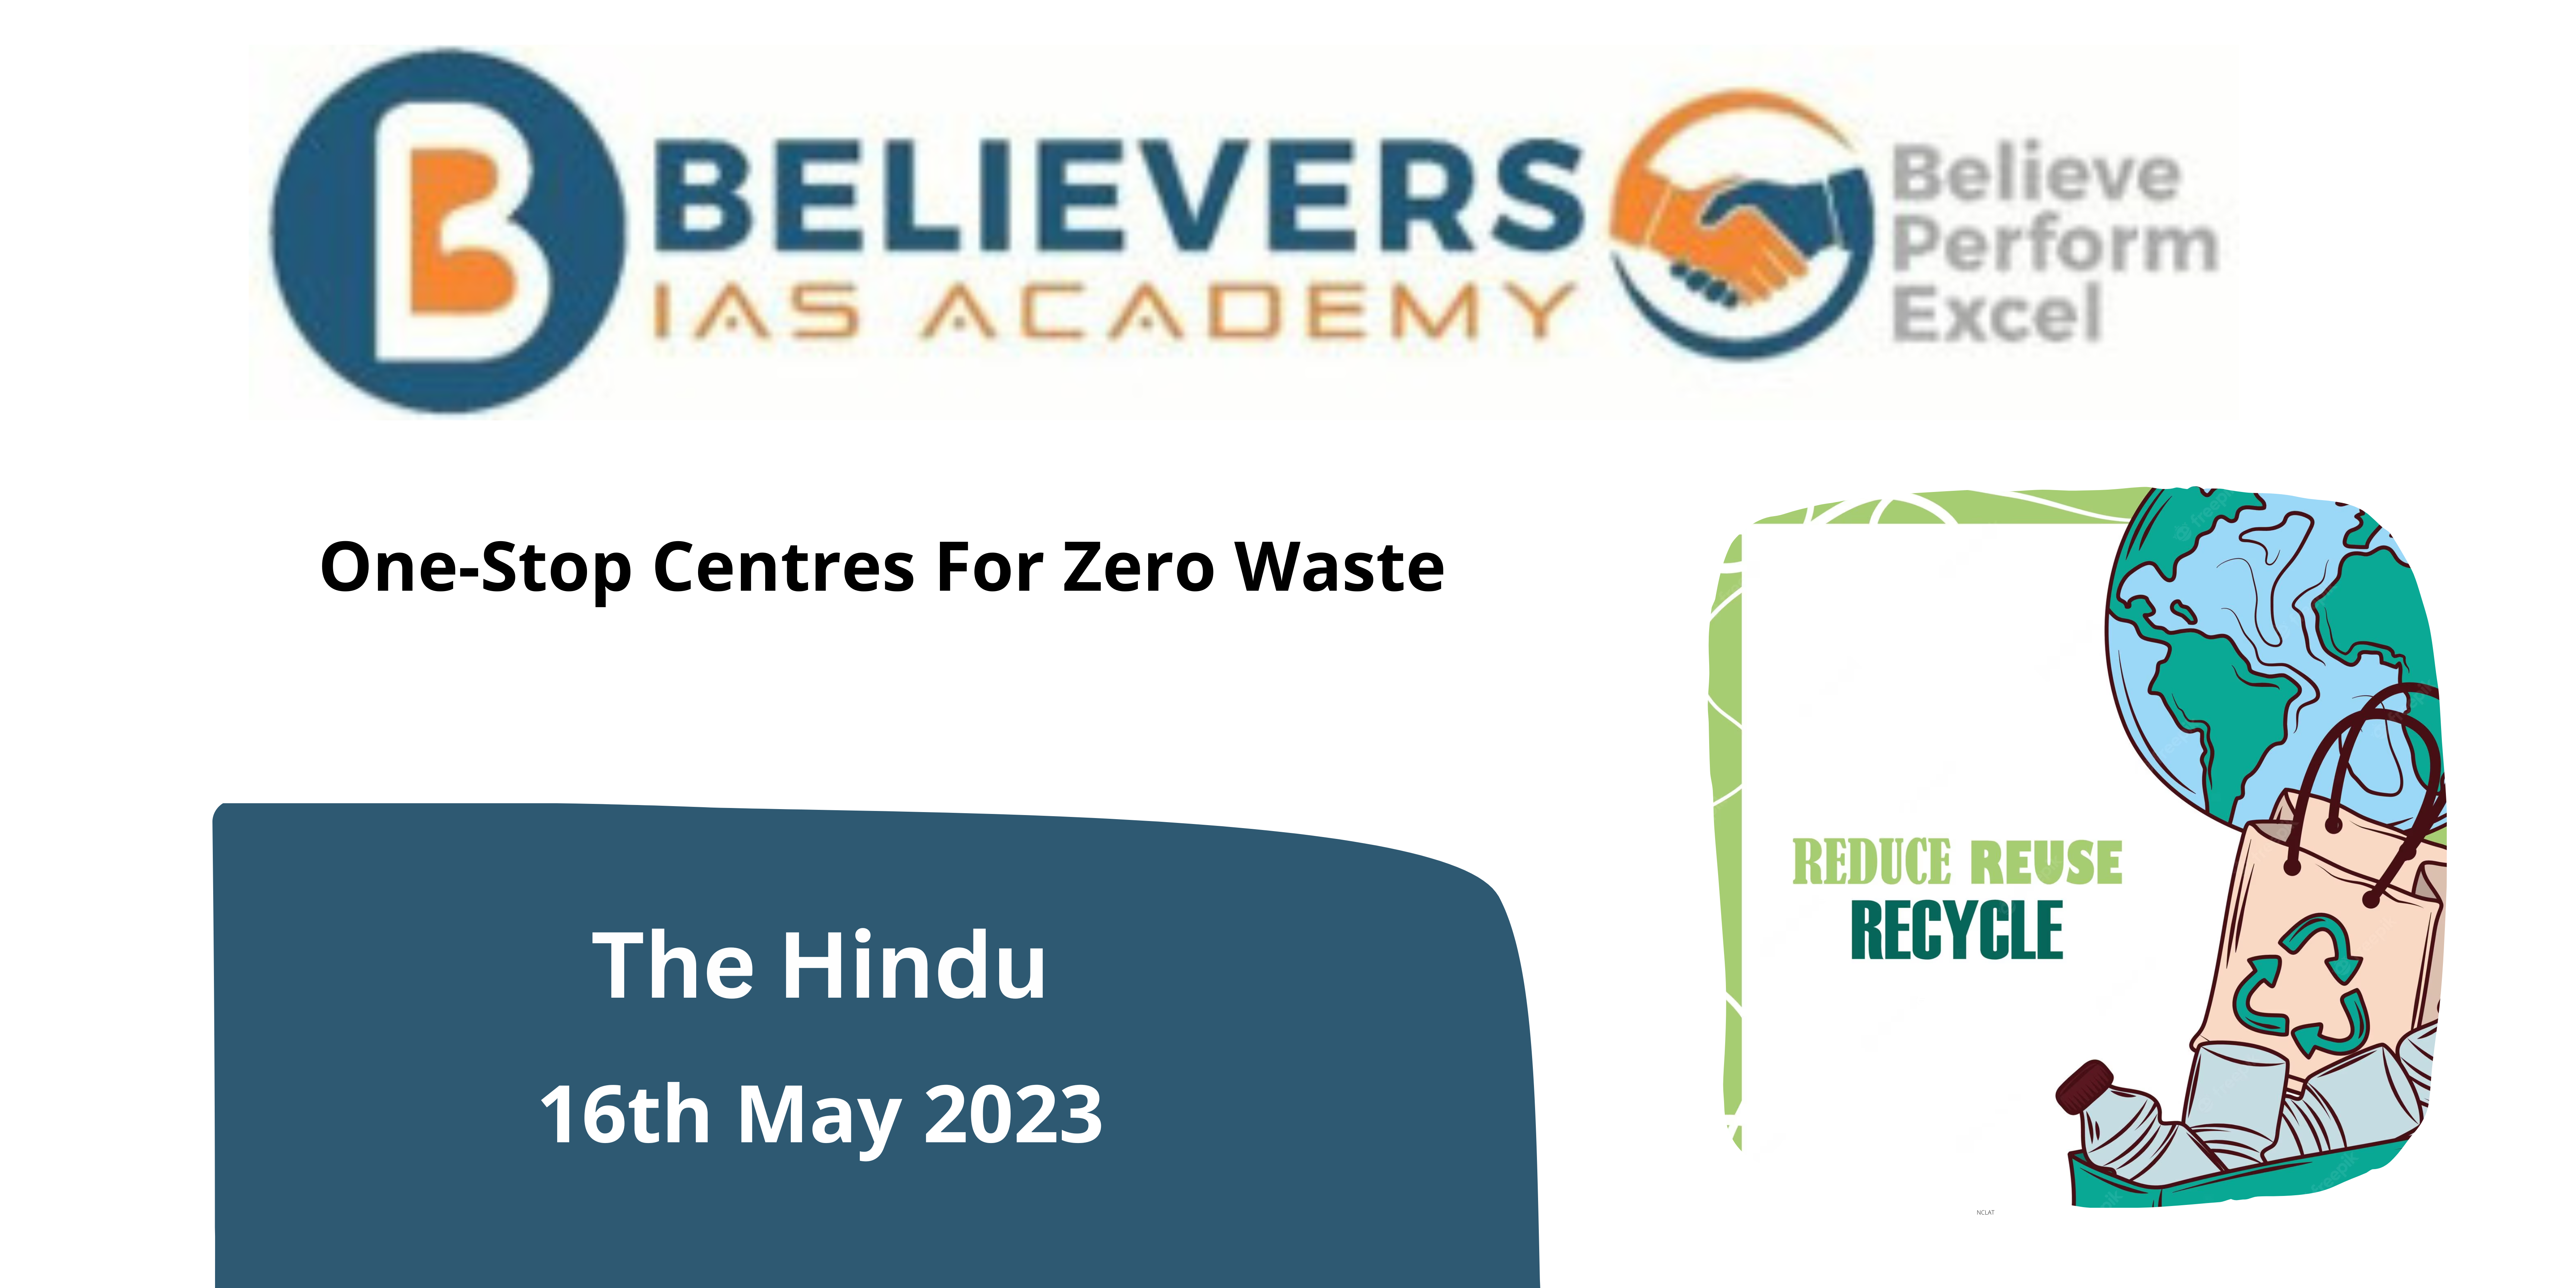 One-Stop Centres For Zero Waste